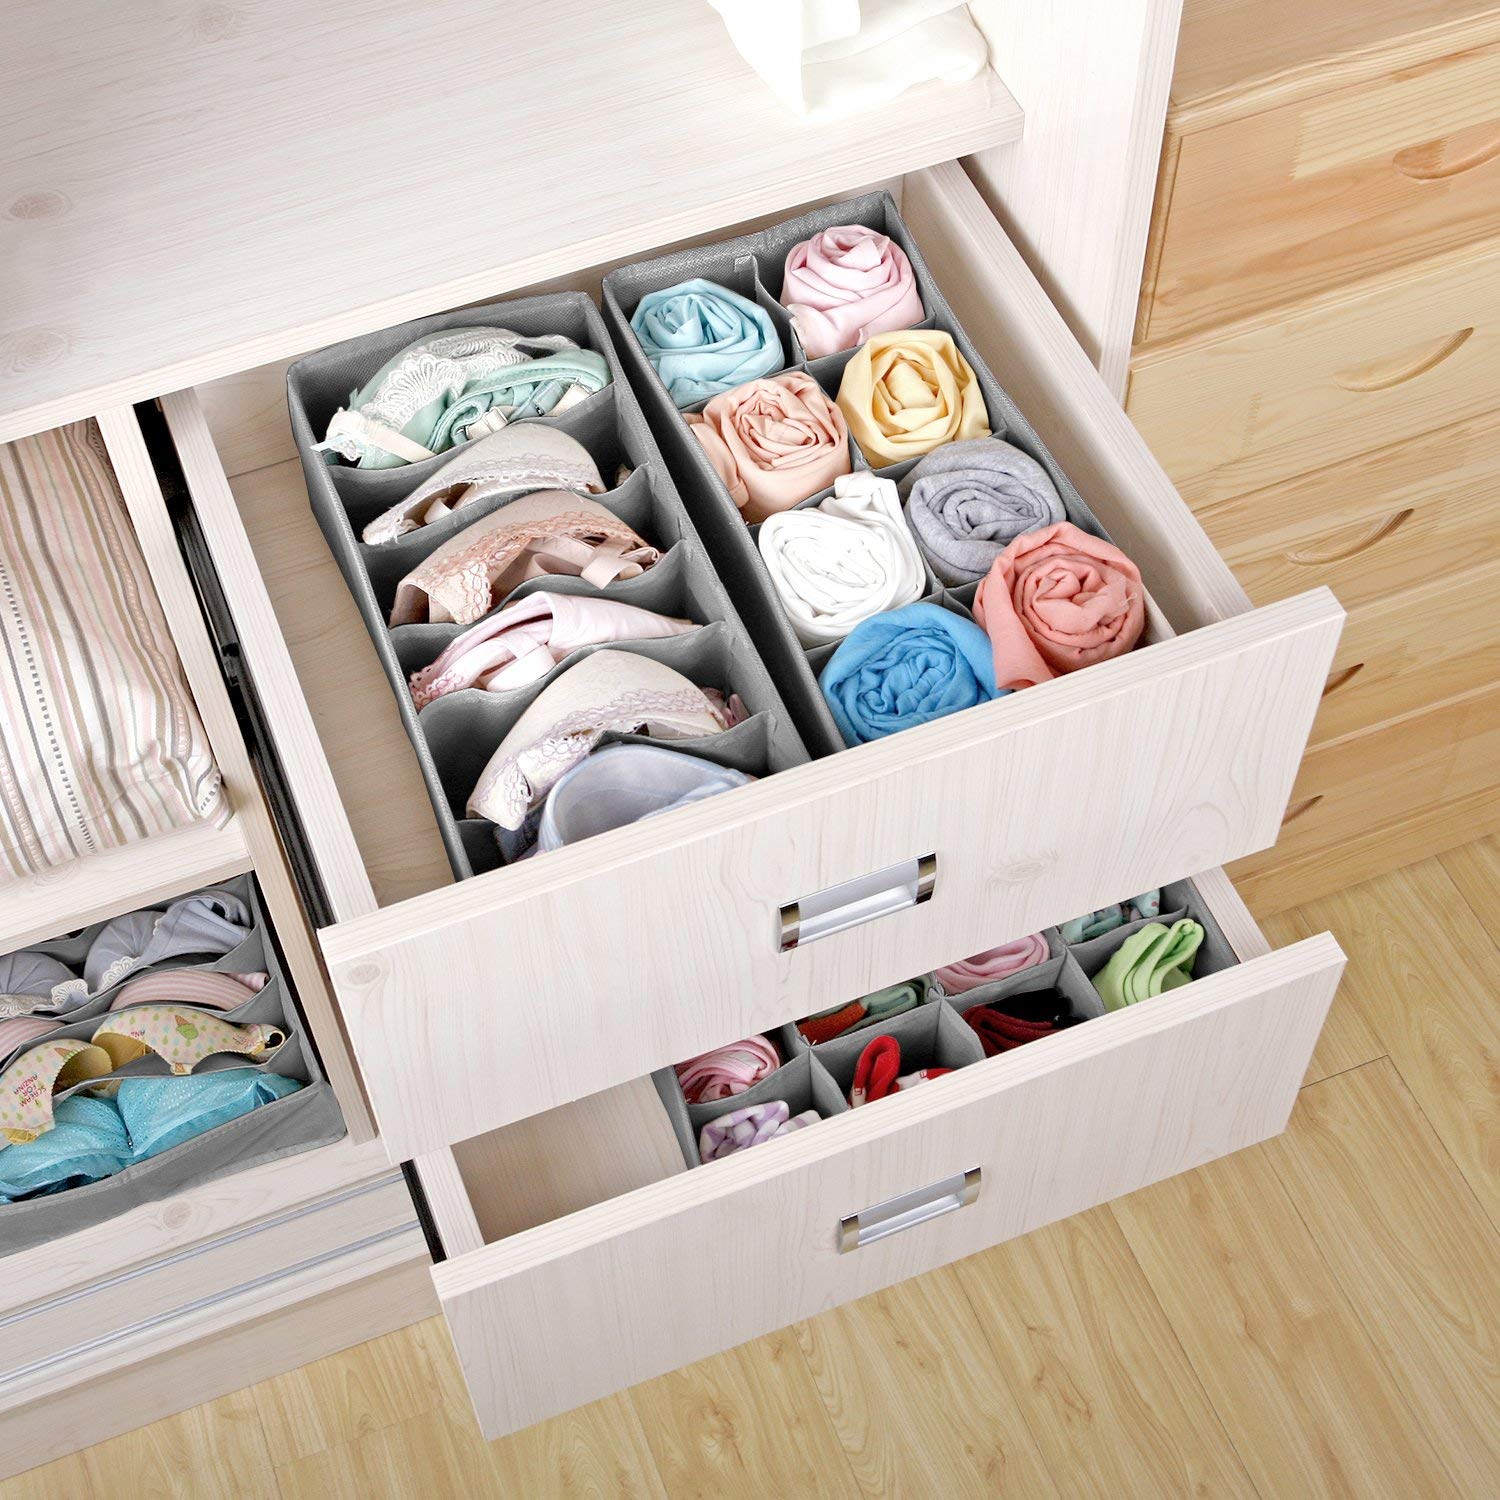 Spring Savings Clearance Items! Zeceouar Clearance Items for Home Socks  Underwear Storage Box With Lid,13 Lattice Partition Drawer  Organizer,Foldable Closet Storage Box Socks,Bra,Tie,Towel,Scarf 